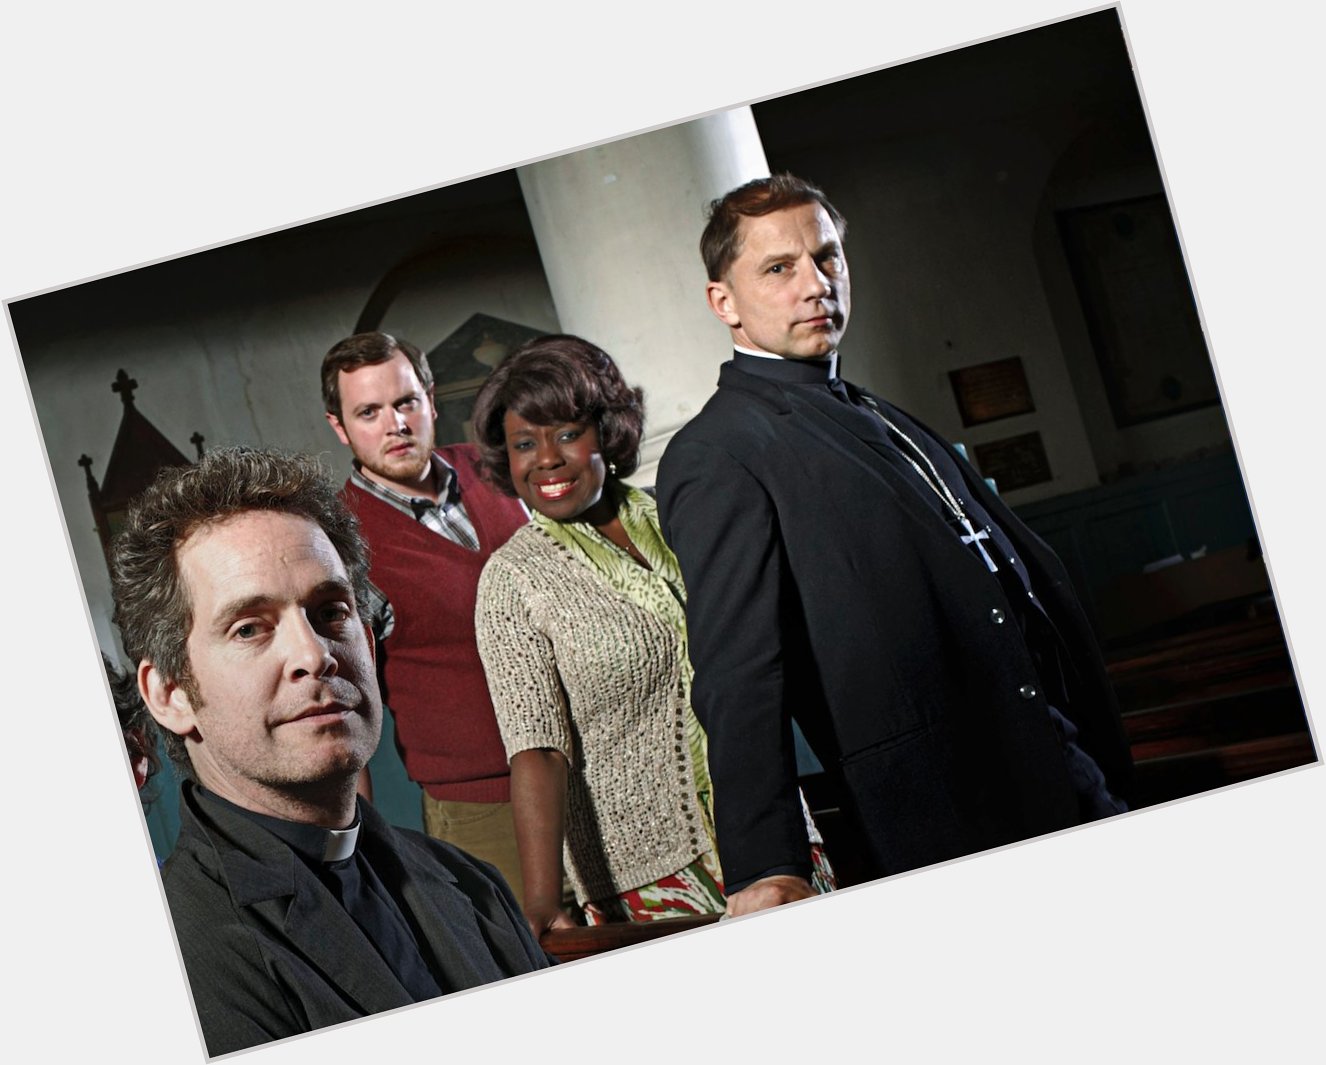 Happy birthday to Tom Hollander and to his Rev co-star Simon McBurney. PS Please bring back Rev... 